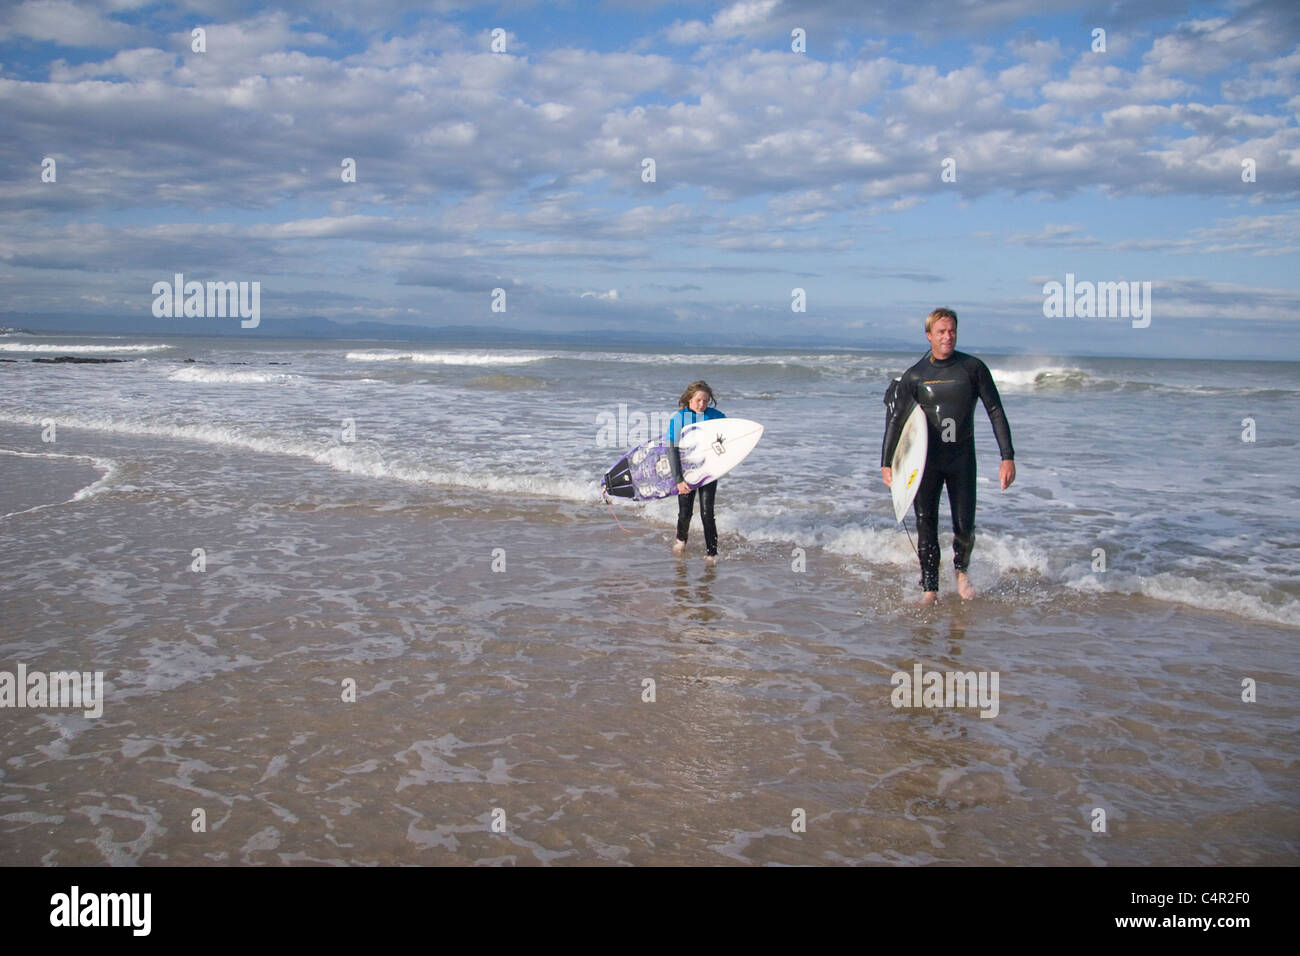 Young girl at surf school, Jeffreys Bay, South Africa Stock Photo